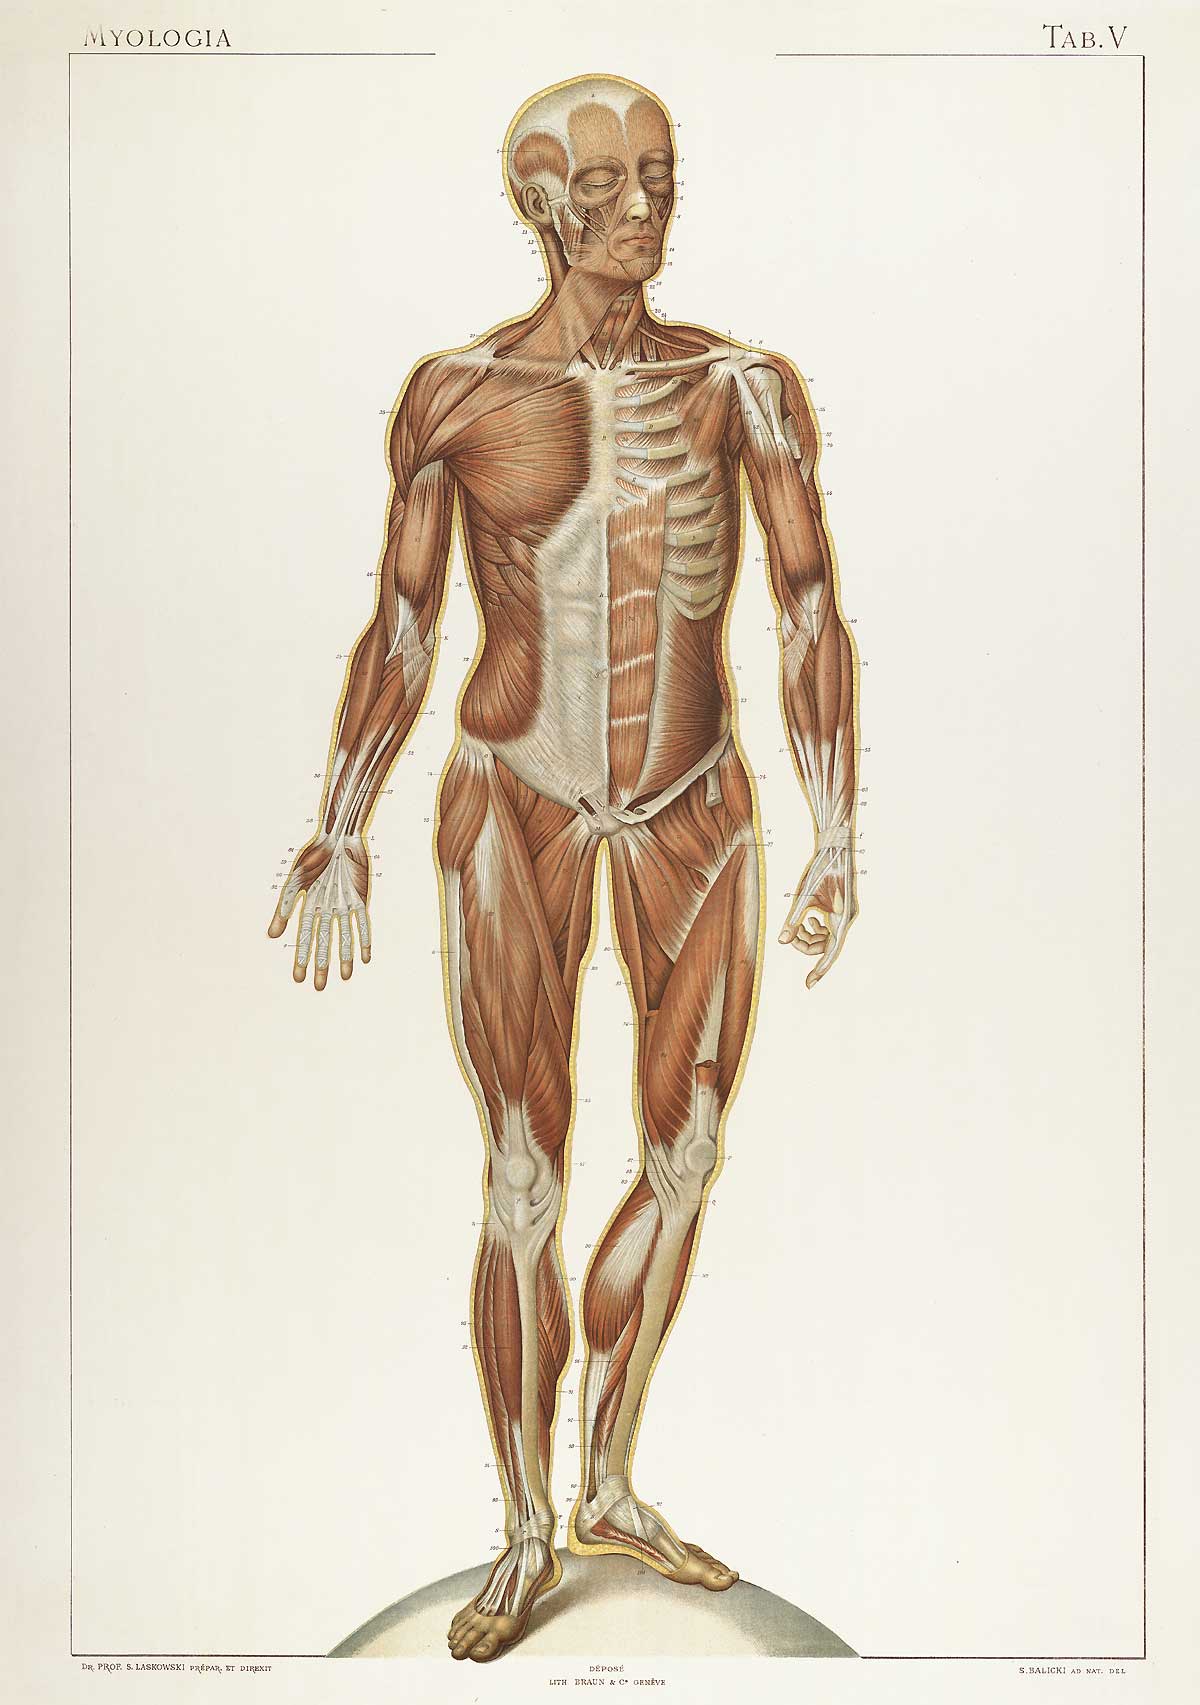 Plate 5 of Sigismond Laskowski's Anatomie normale du corps humain, featuring the frontal view of a flayed corpse standing on a sphere displaying the muscles of the front of the body.